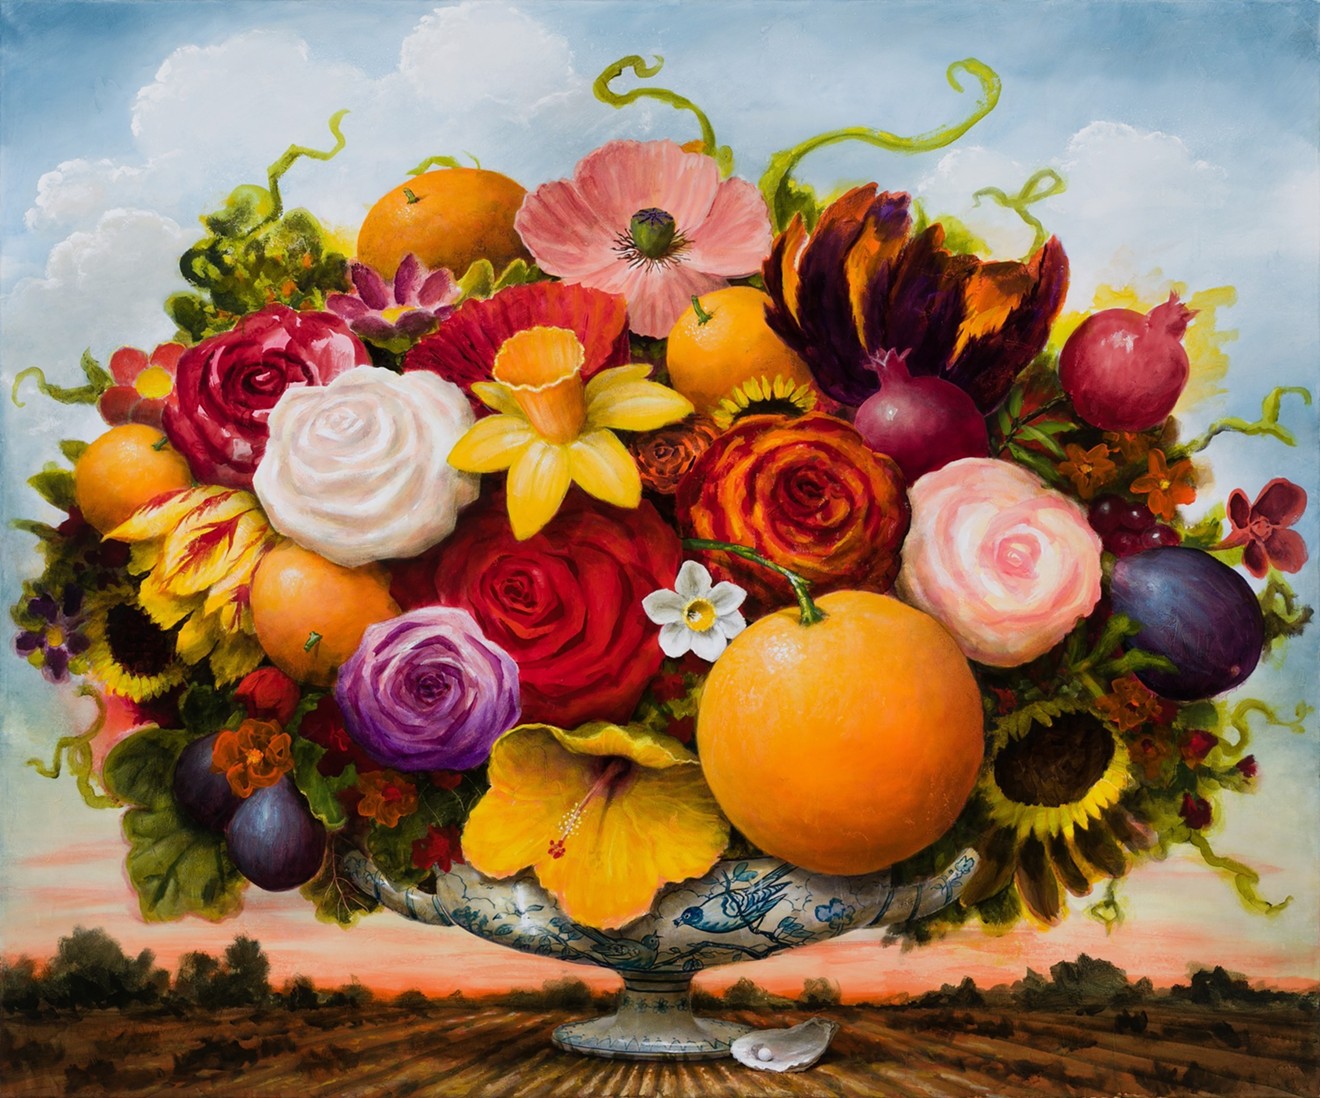 Kevin Sloan, “Arrangement with Unexpected Good Fortune,” 2022, acrylic on canvas.